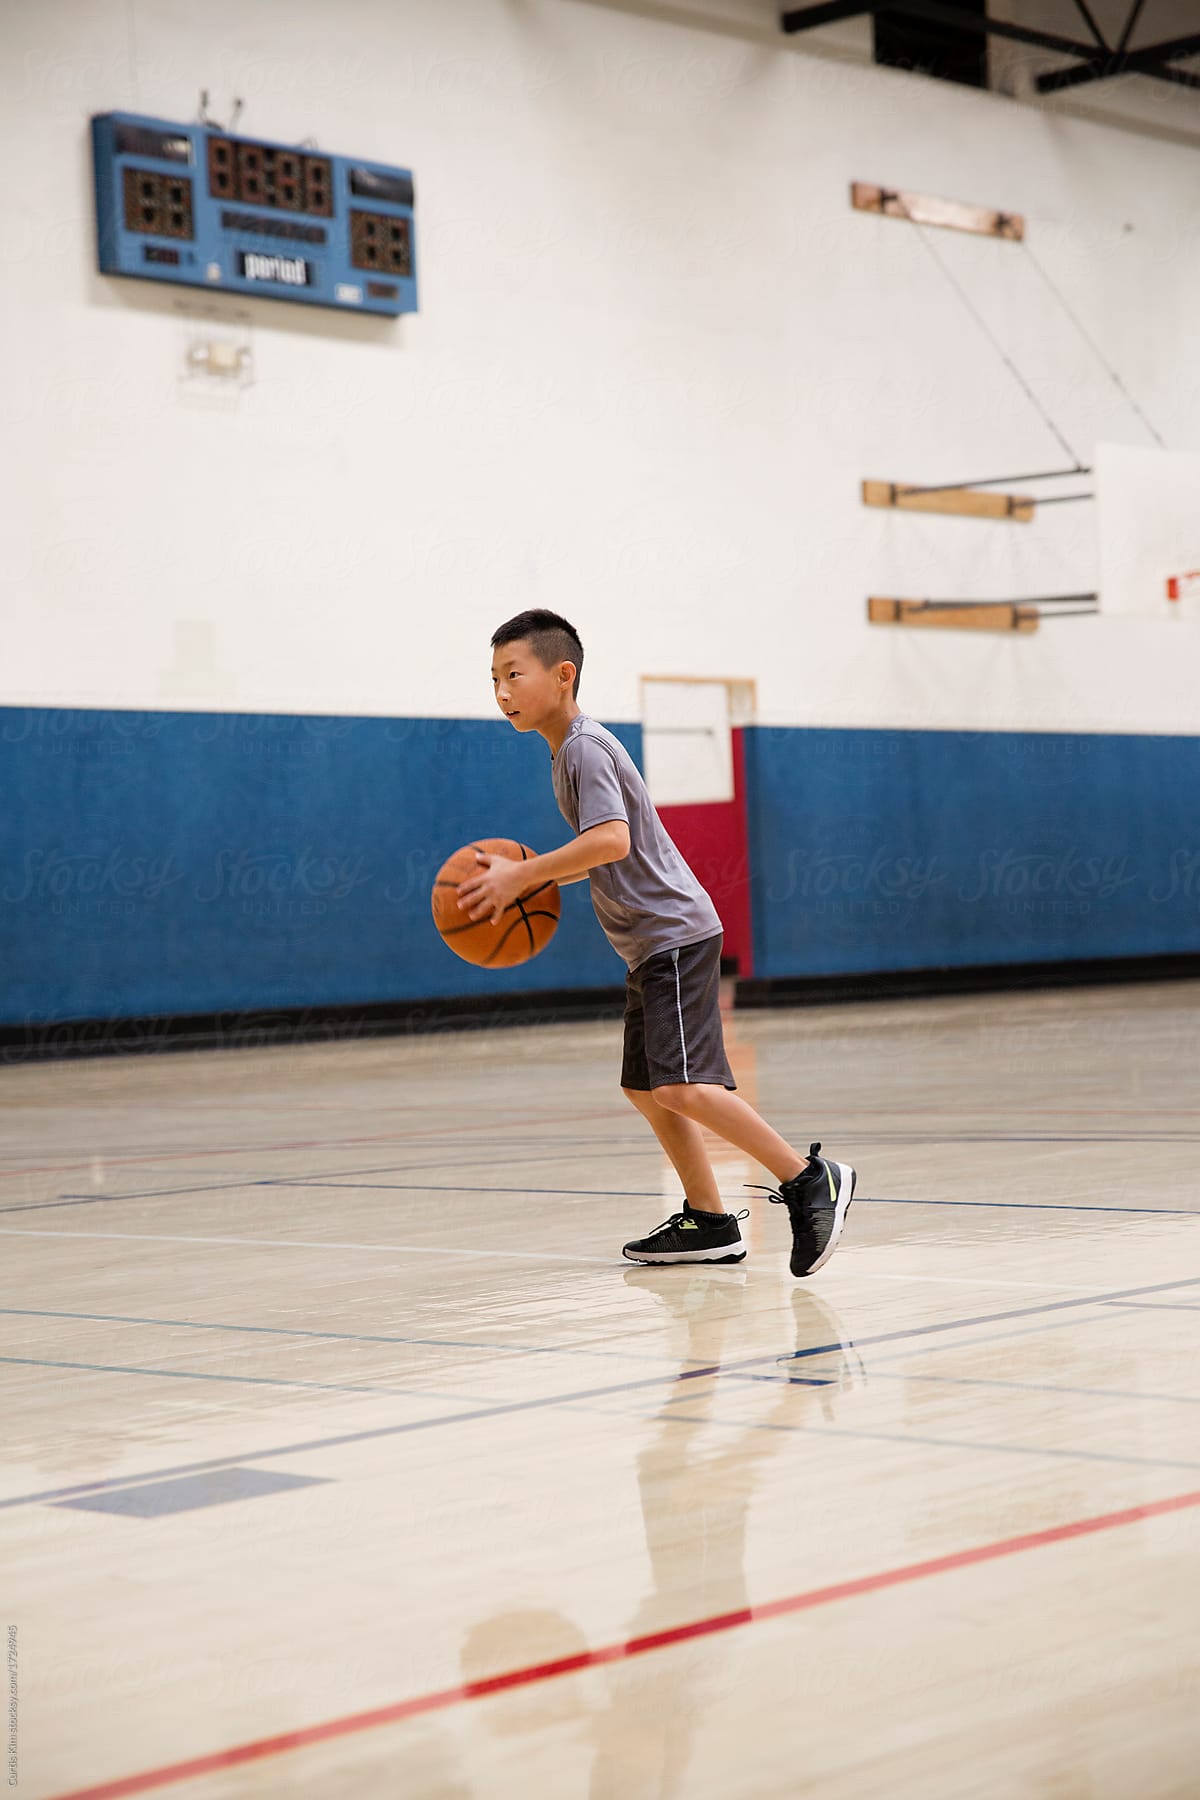 Boy playing basketball in an indoor gym